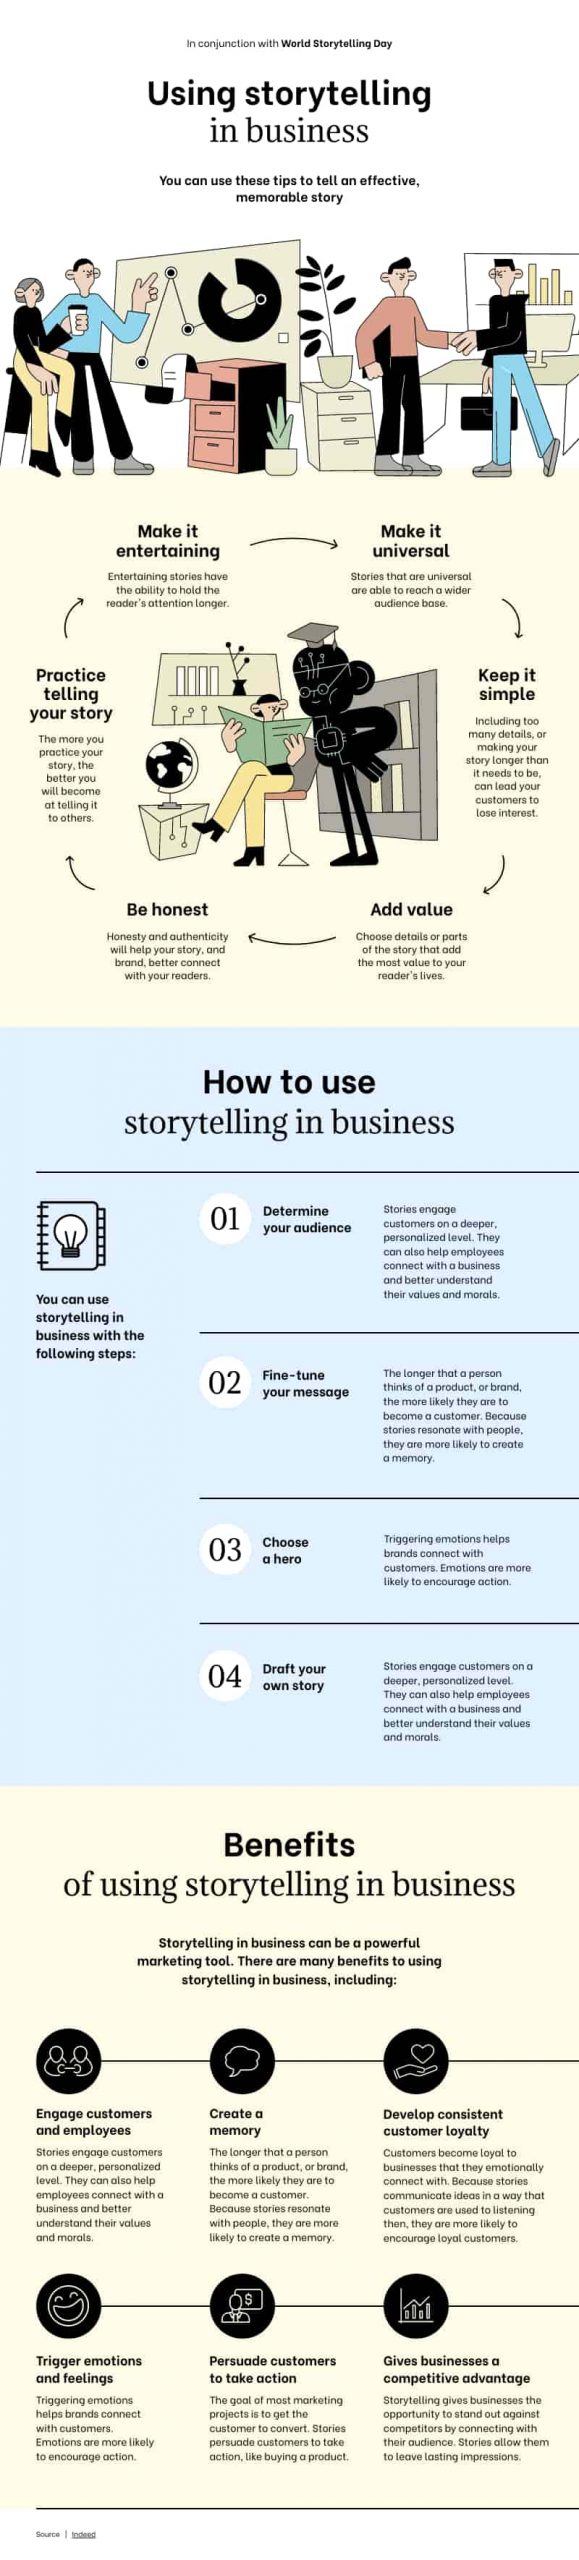 storytelling in business infographic